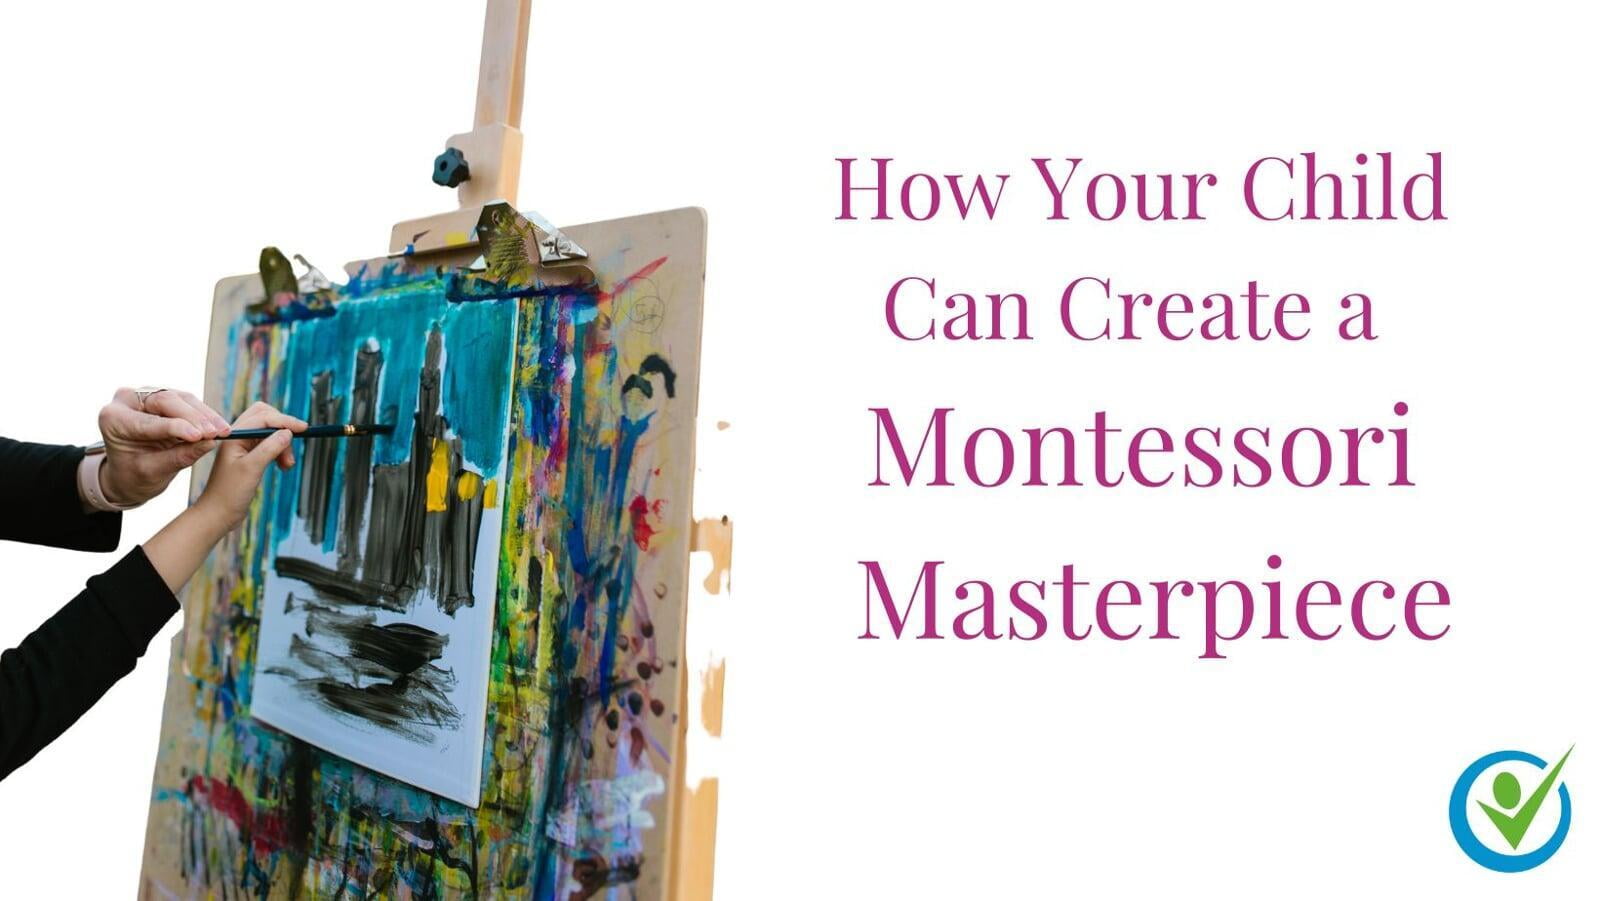 How Your Child Can Create a Montessori Masterpiece